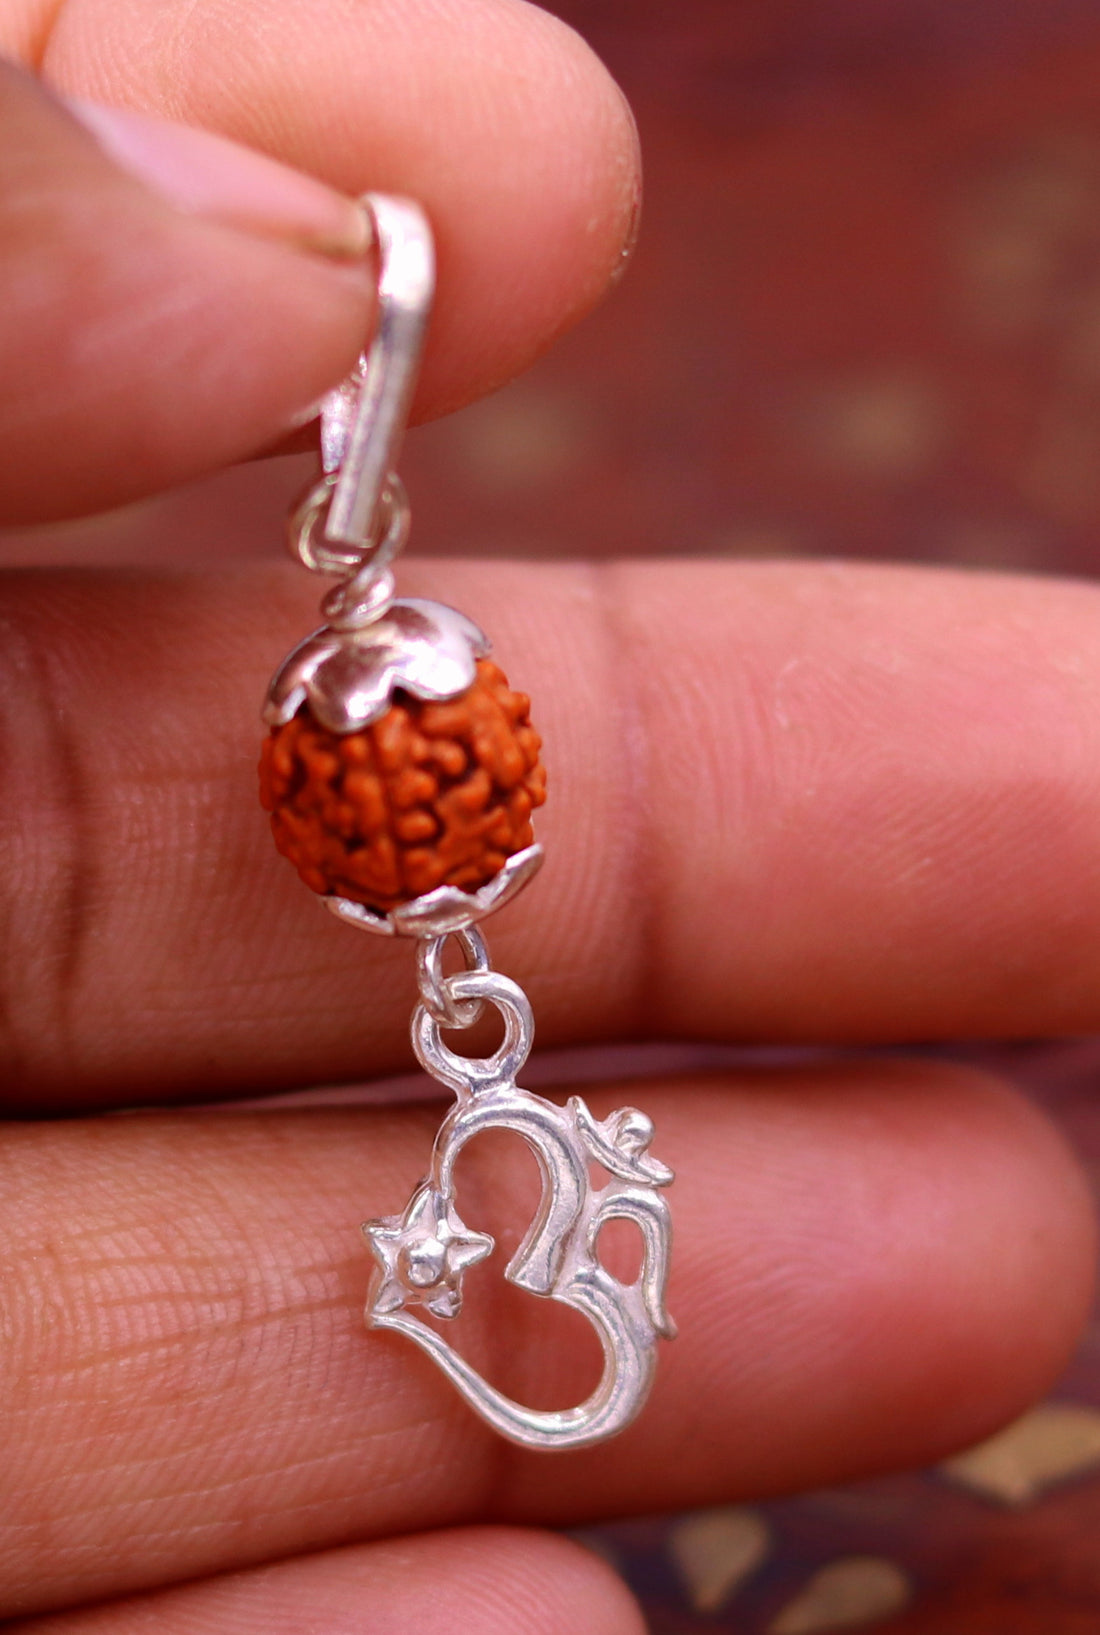 vintage design Sterling silver Aum mantra pendant with Natural rudraksha beads excellent unisex gifting light weight jewelry nsp281 - TRIBAL ORNAMENTS